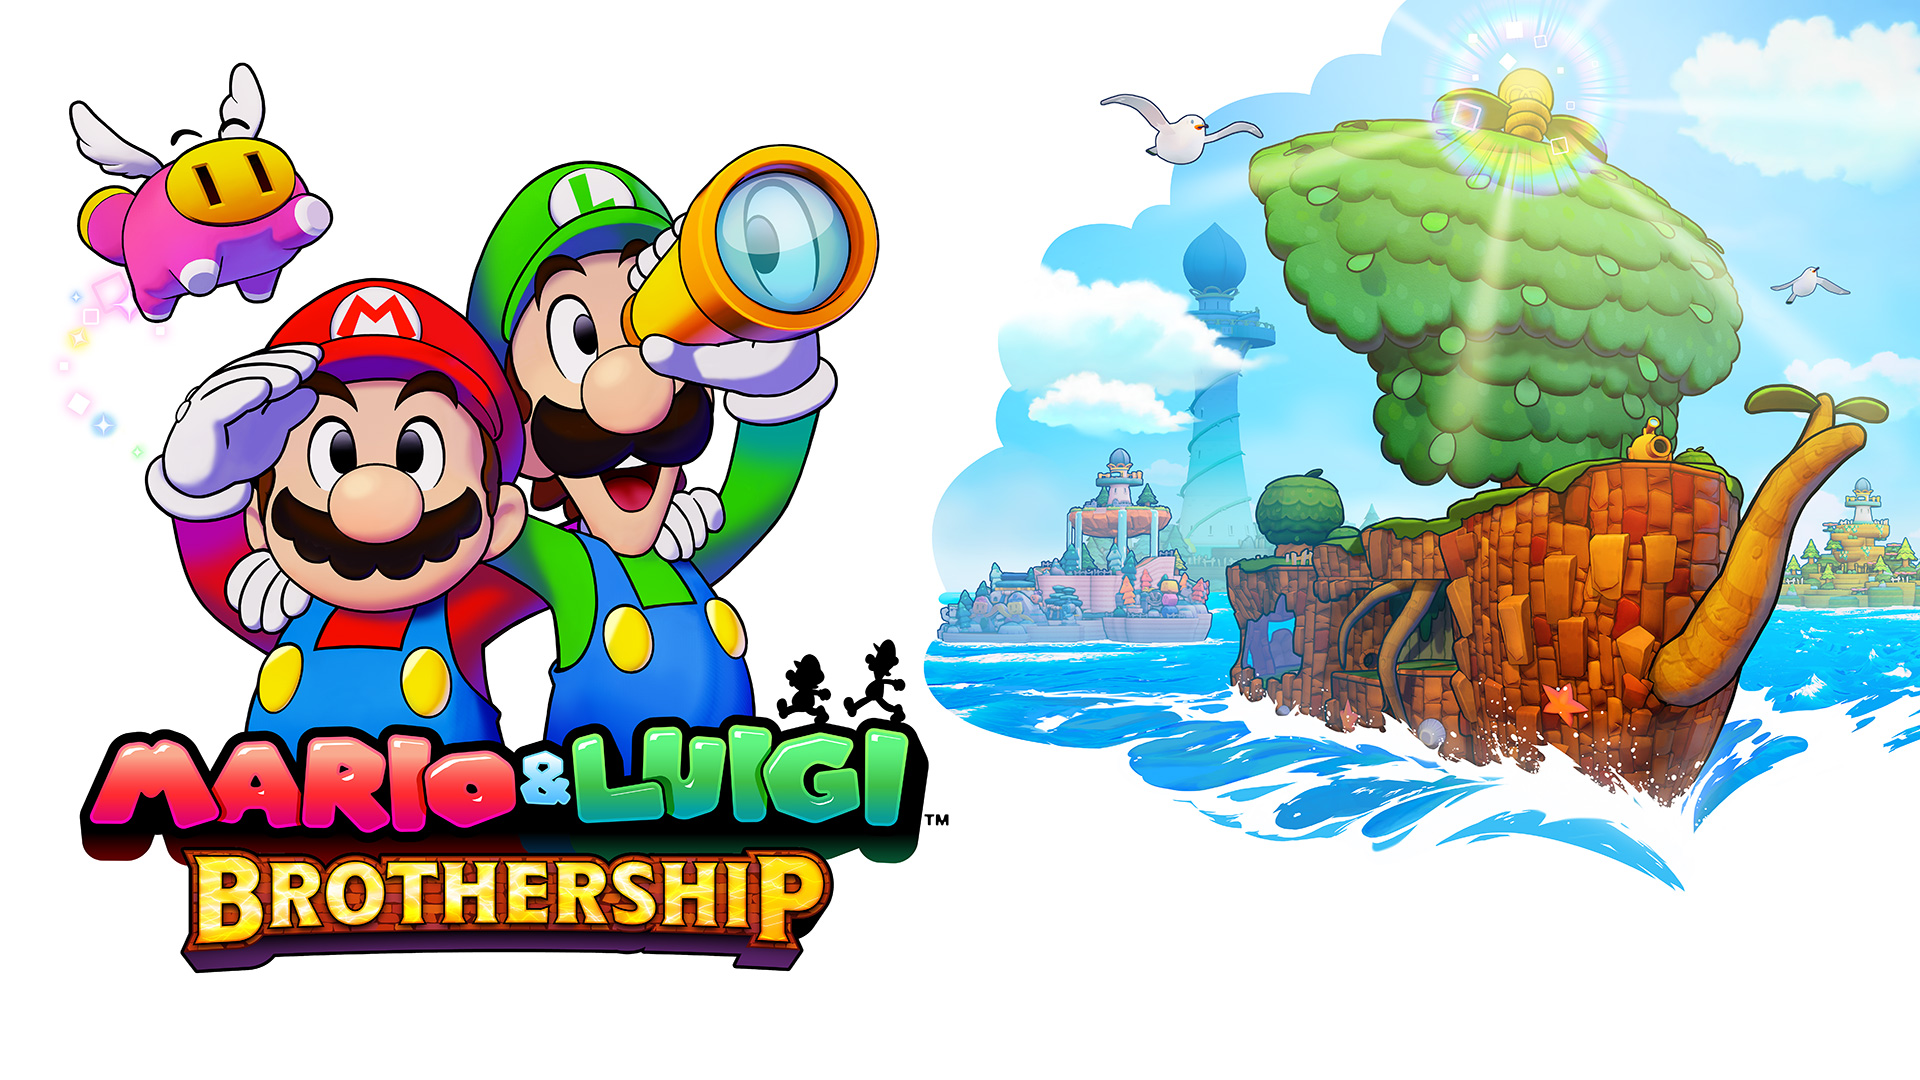 Mario & Luigi: Brothership is the first new game in the RPG series in nearly a decade